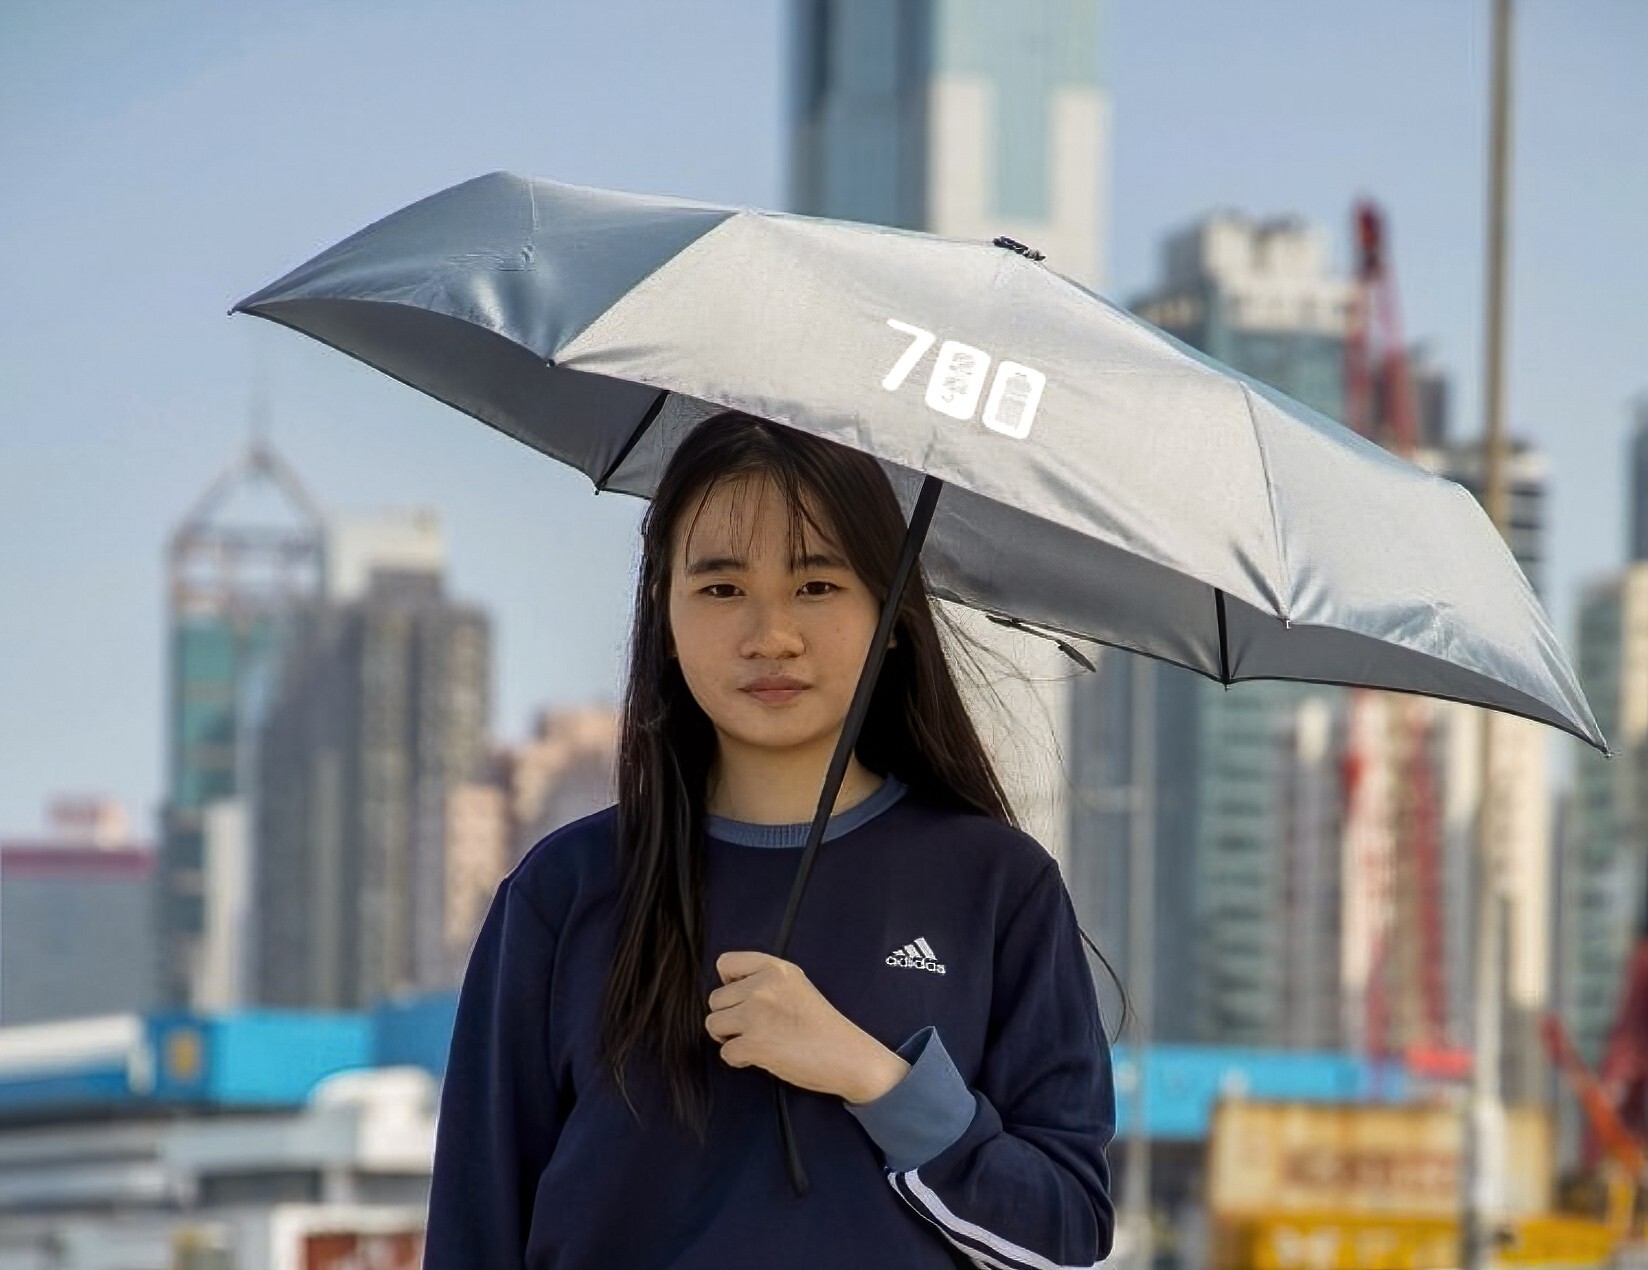 A team called Unbounded has produced umbrellas made out of old plastic water bottles. Photo: Instagram